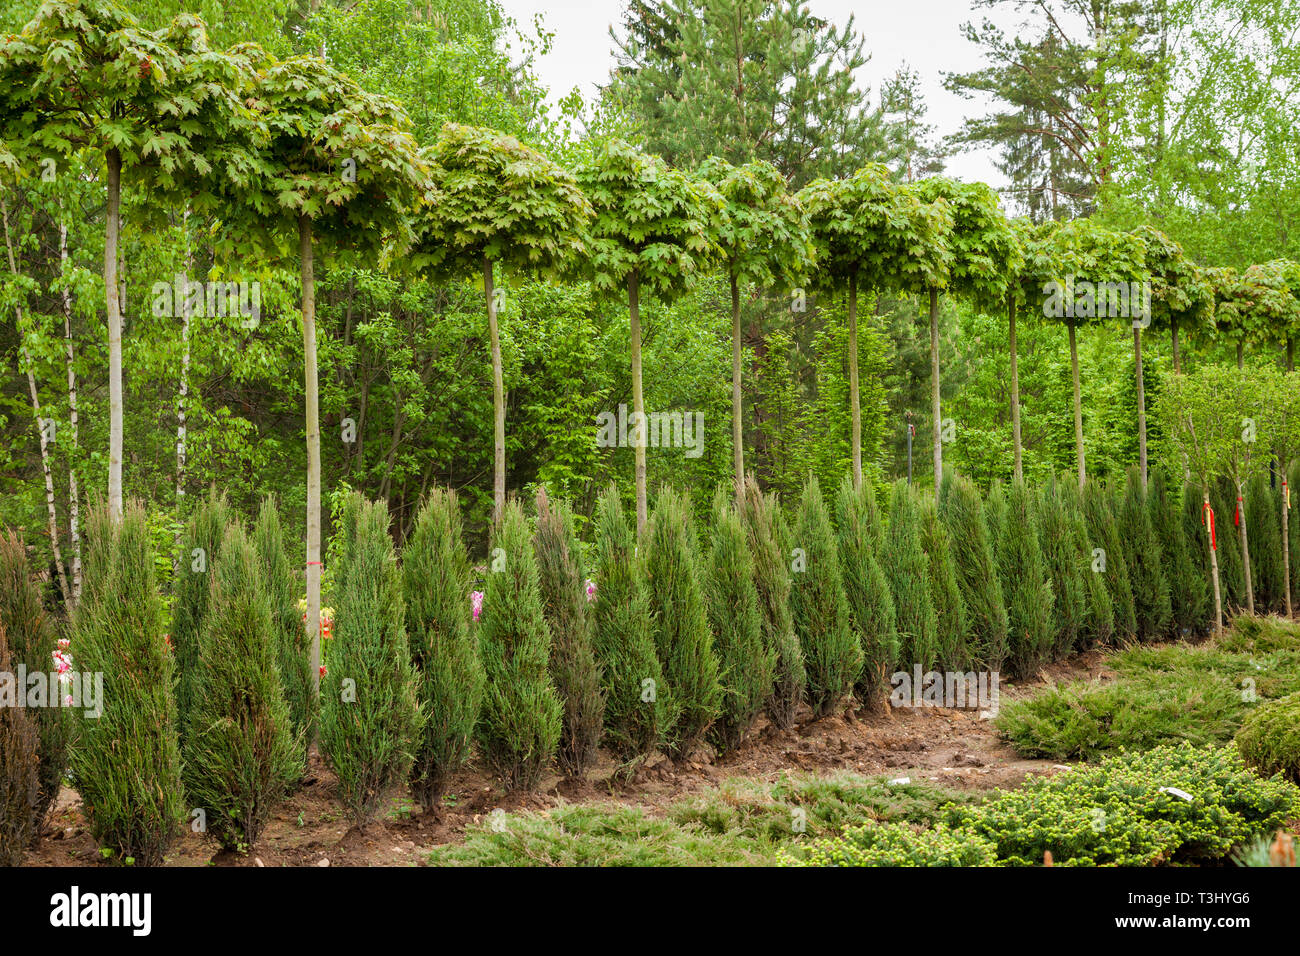 Rows of young maple trees, thuja plants and juniper bushes. Alley of seedling of trees, bushes, plants at plant nursery. Stock Photo